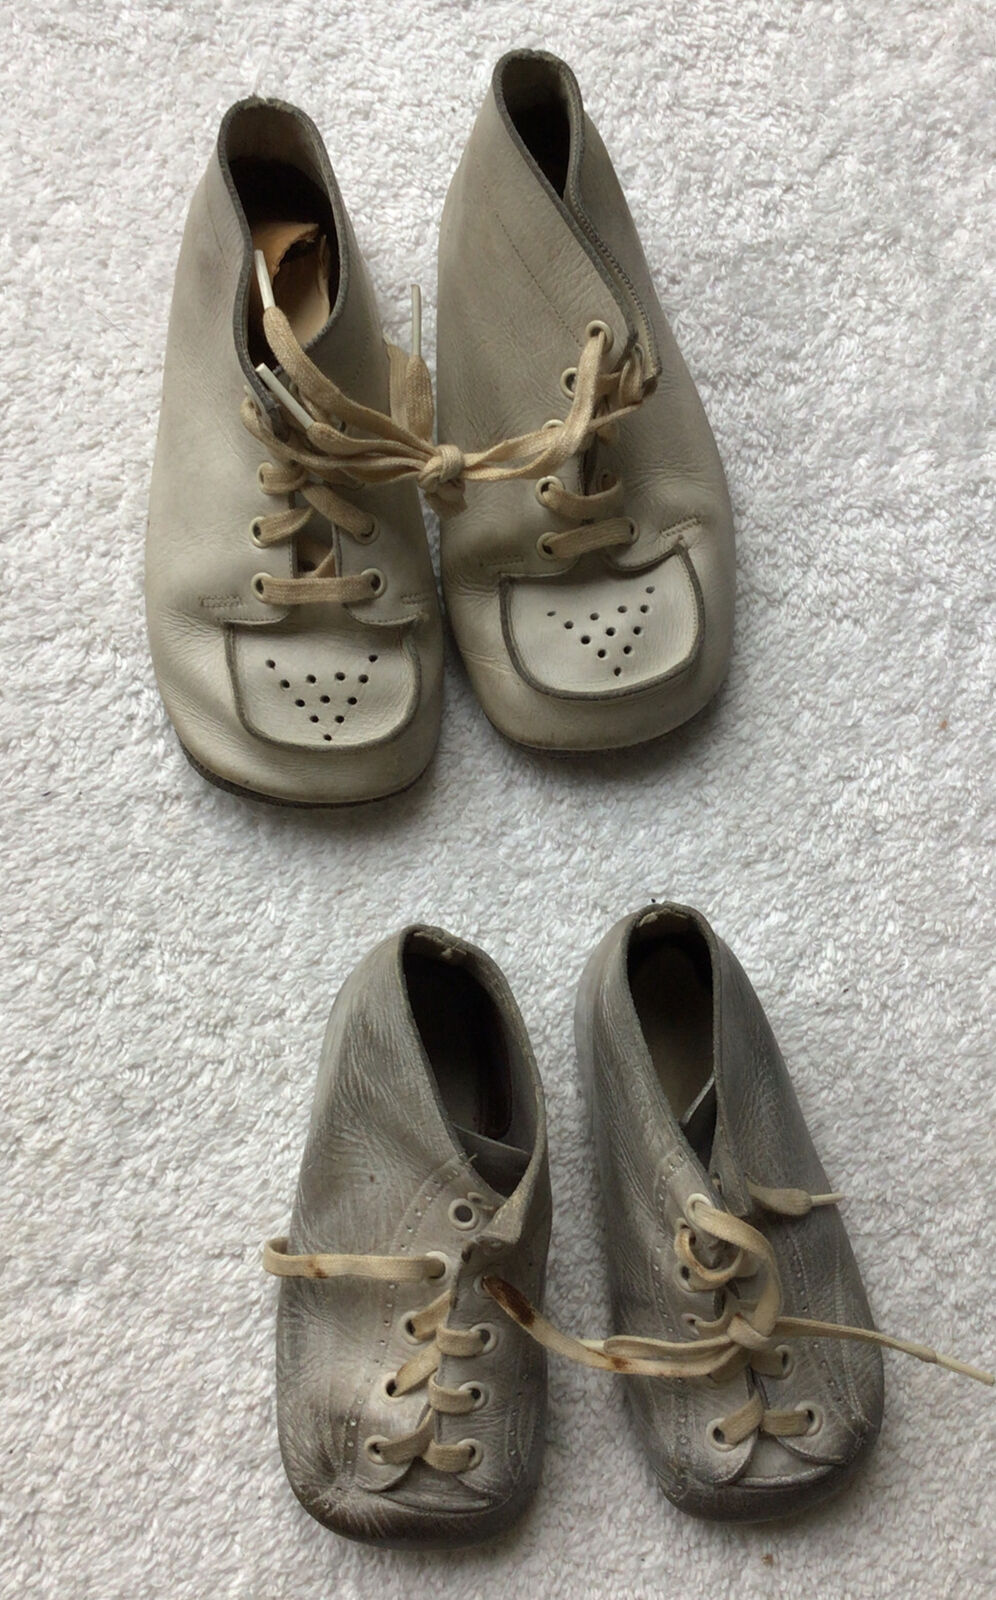 Two Pairs Vintage Mrs Days Ideal Last Infant Toddler Baby Shoes Leather